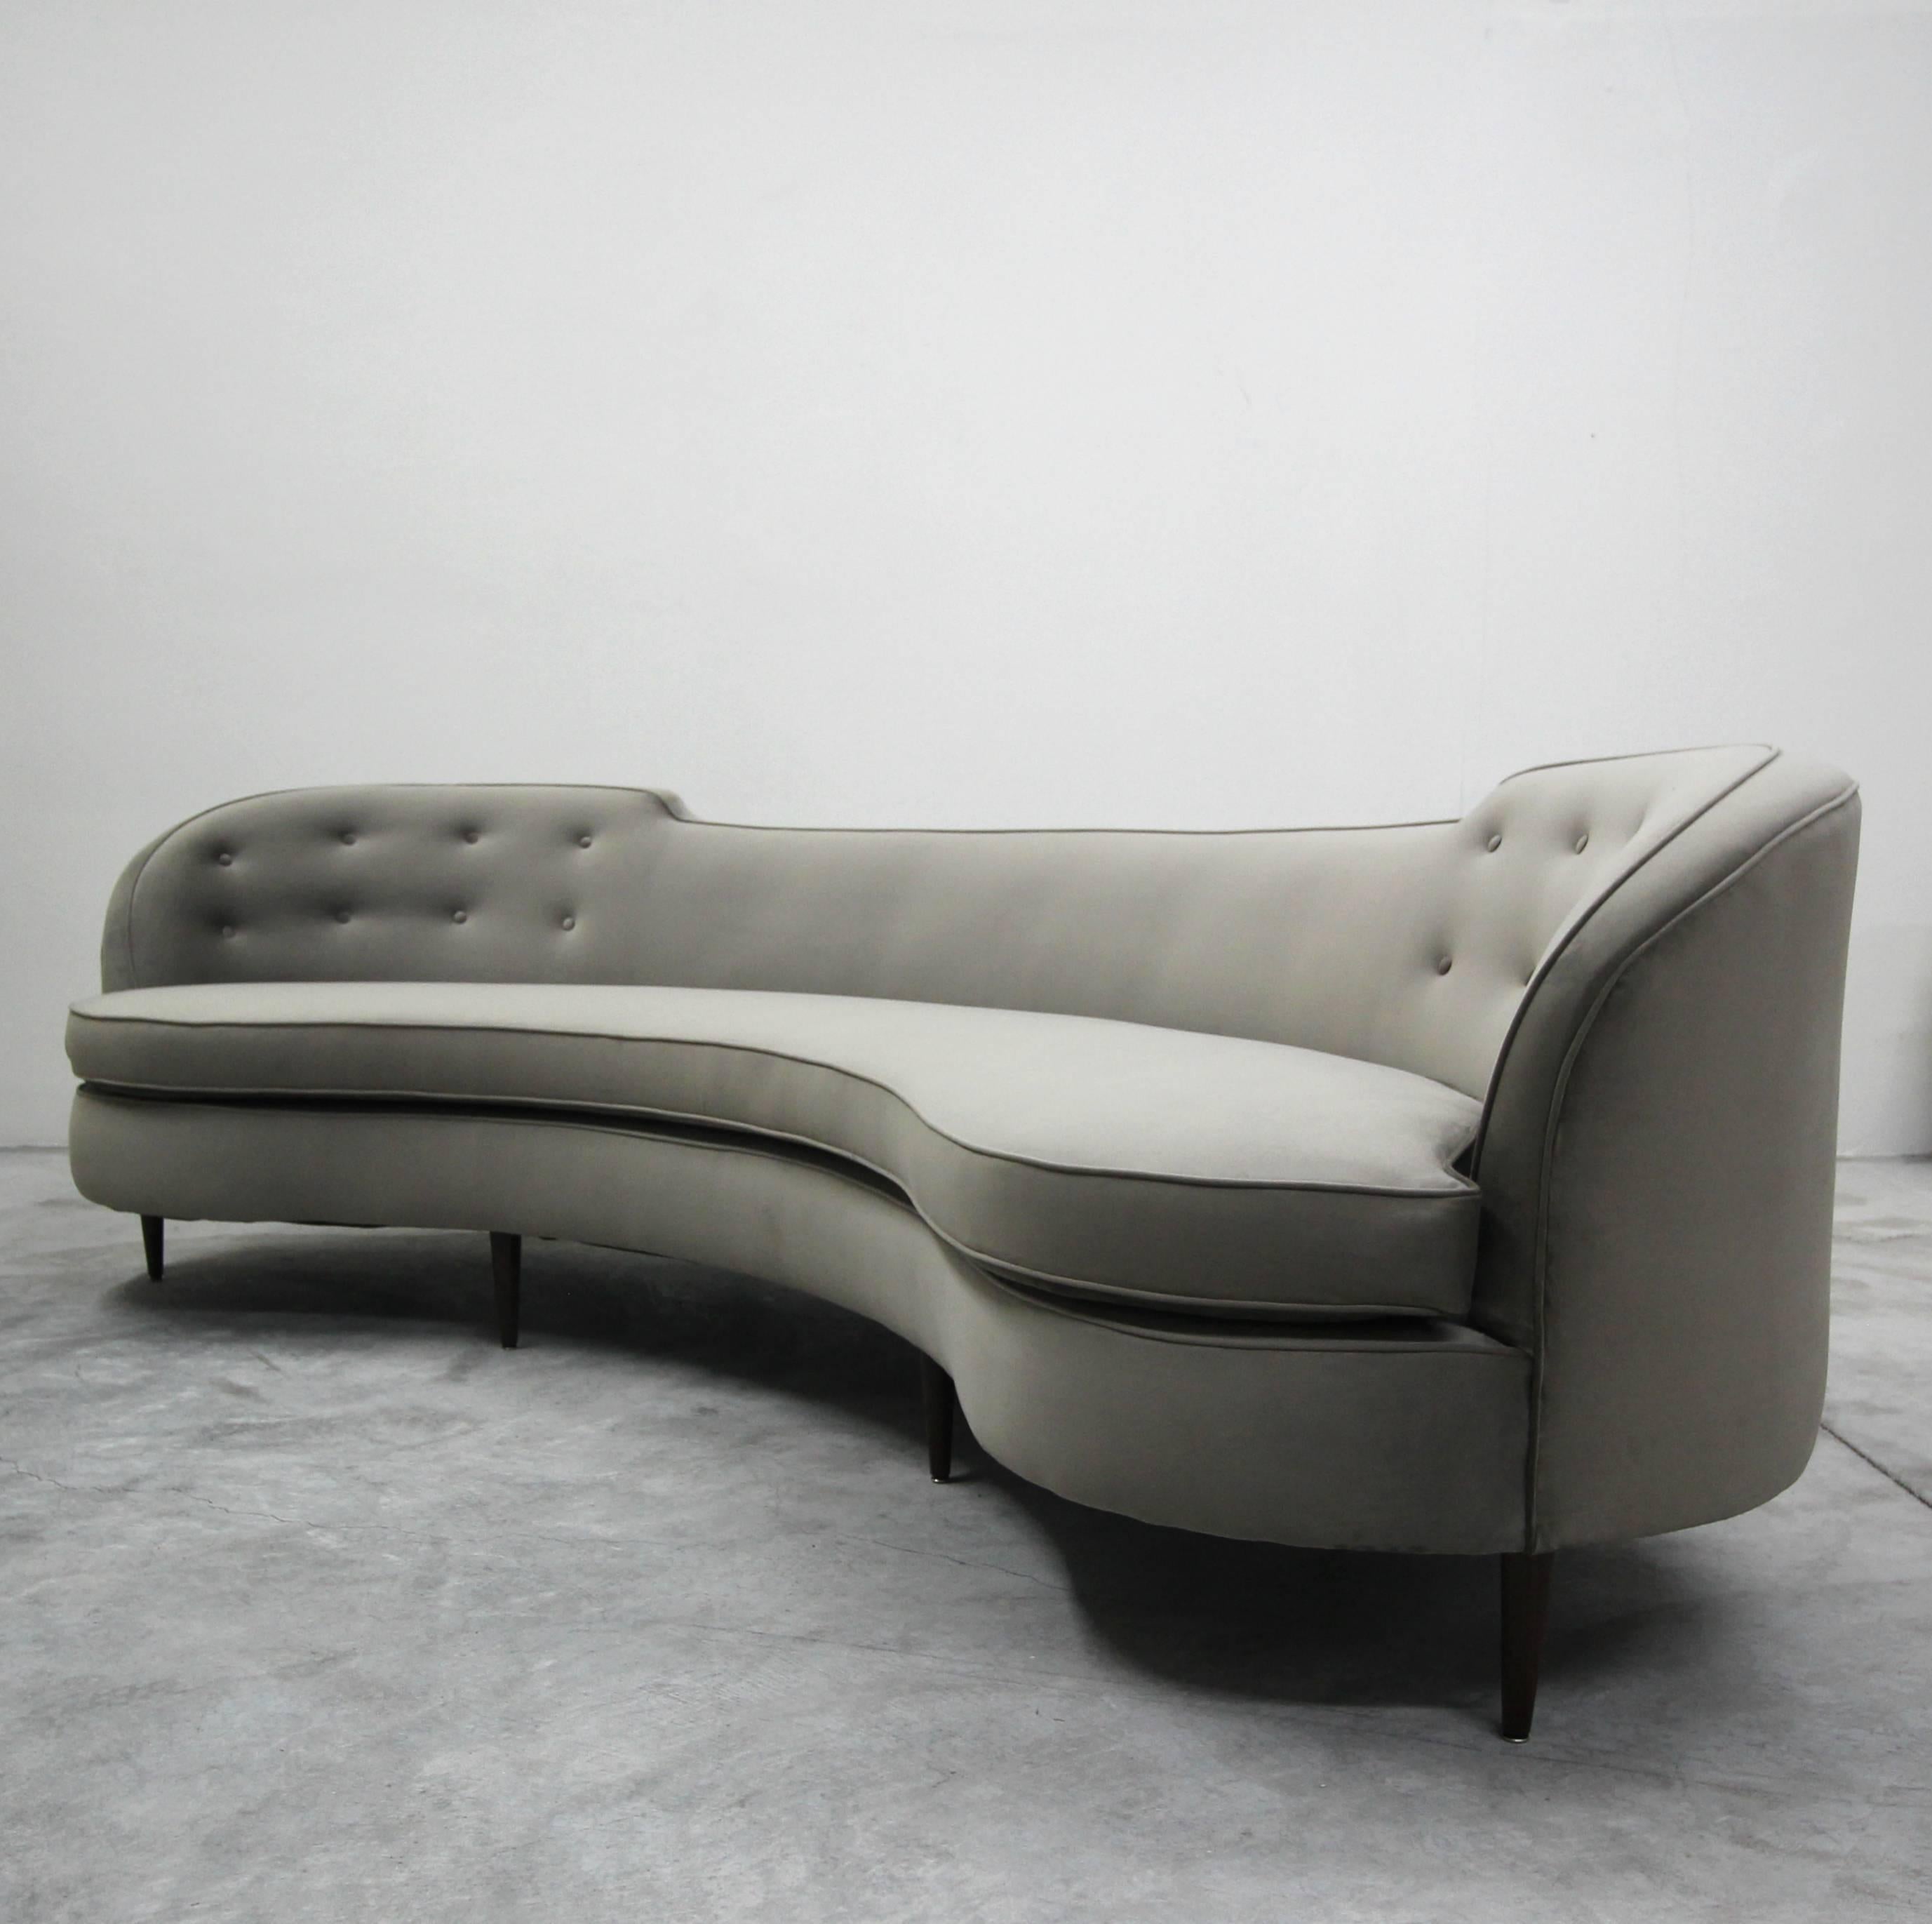 A rare Classic to behold in this stunning vintage Edward Wormley for Dunbar sofa. The rounded lines of this gorgeous sofa combined with its large size create a welcoming 